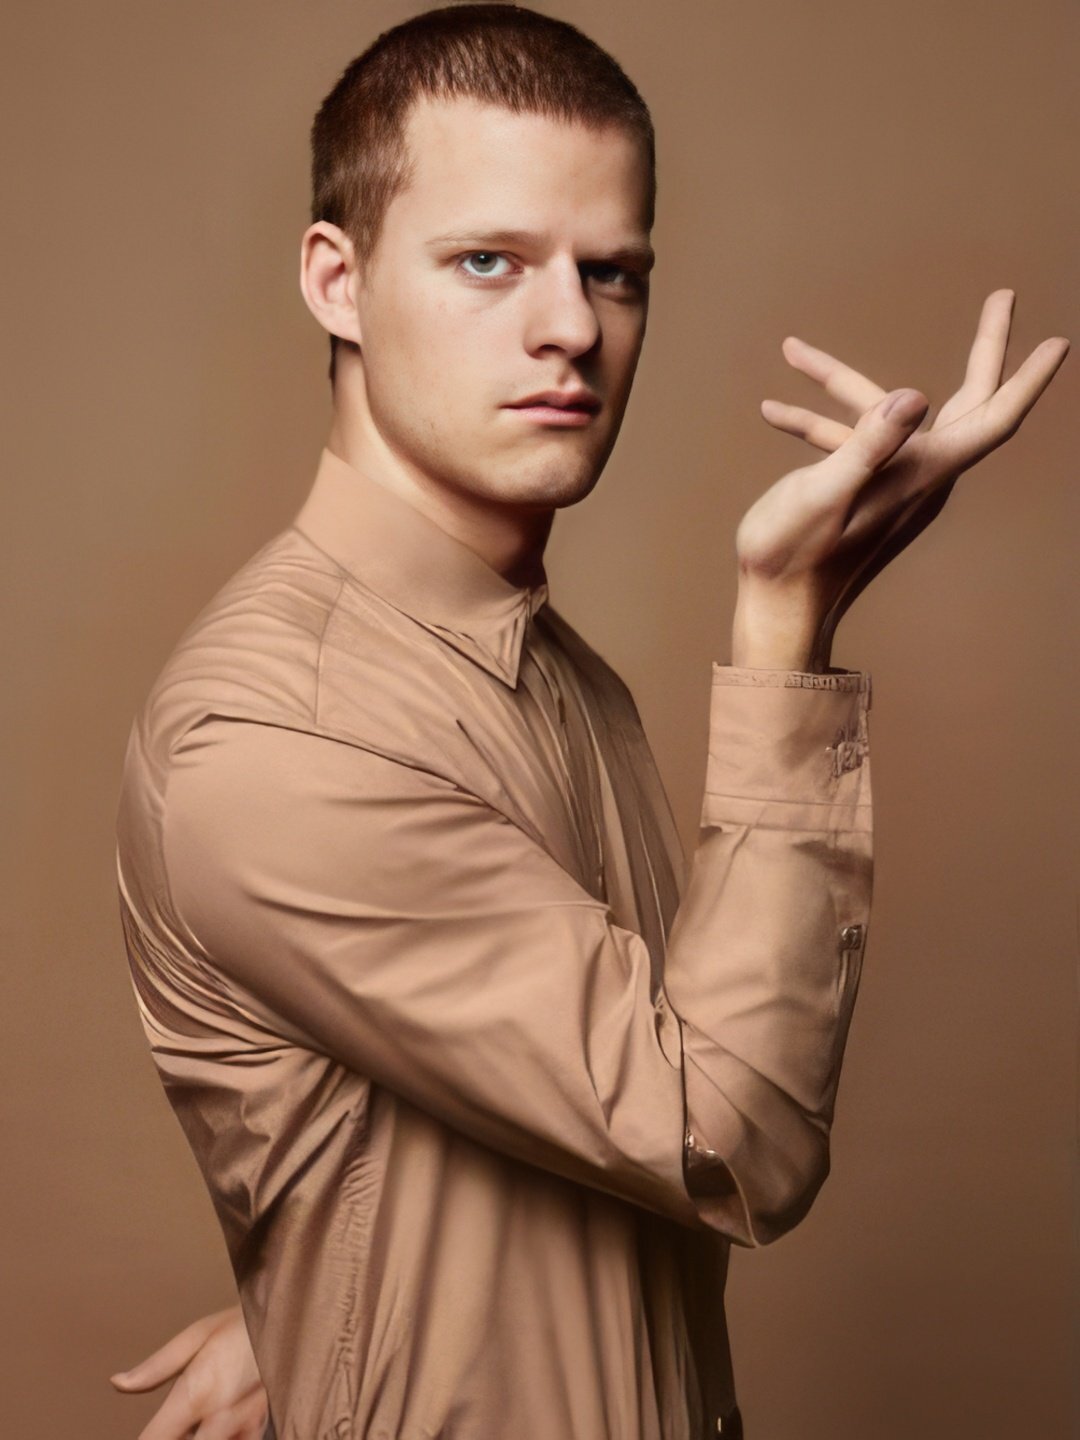 Lucas Hedges who are his parents